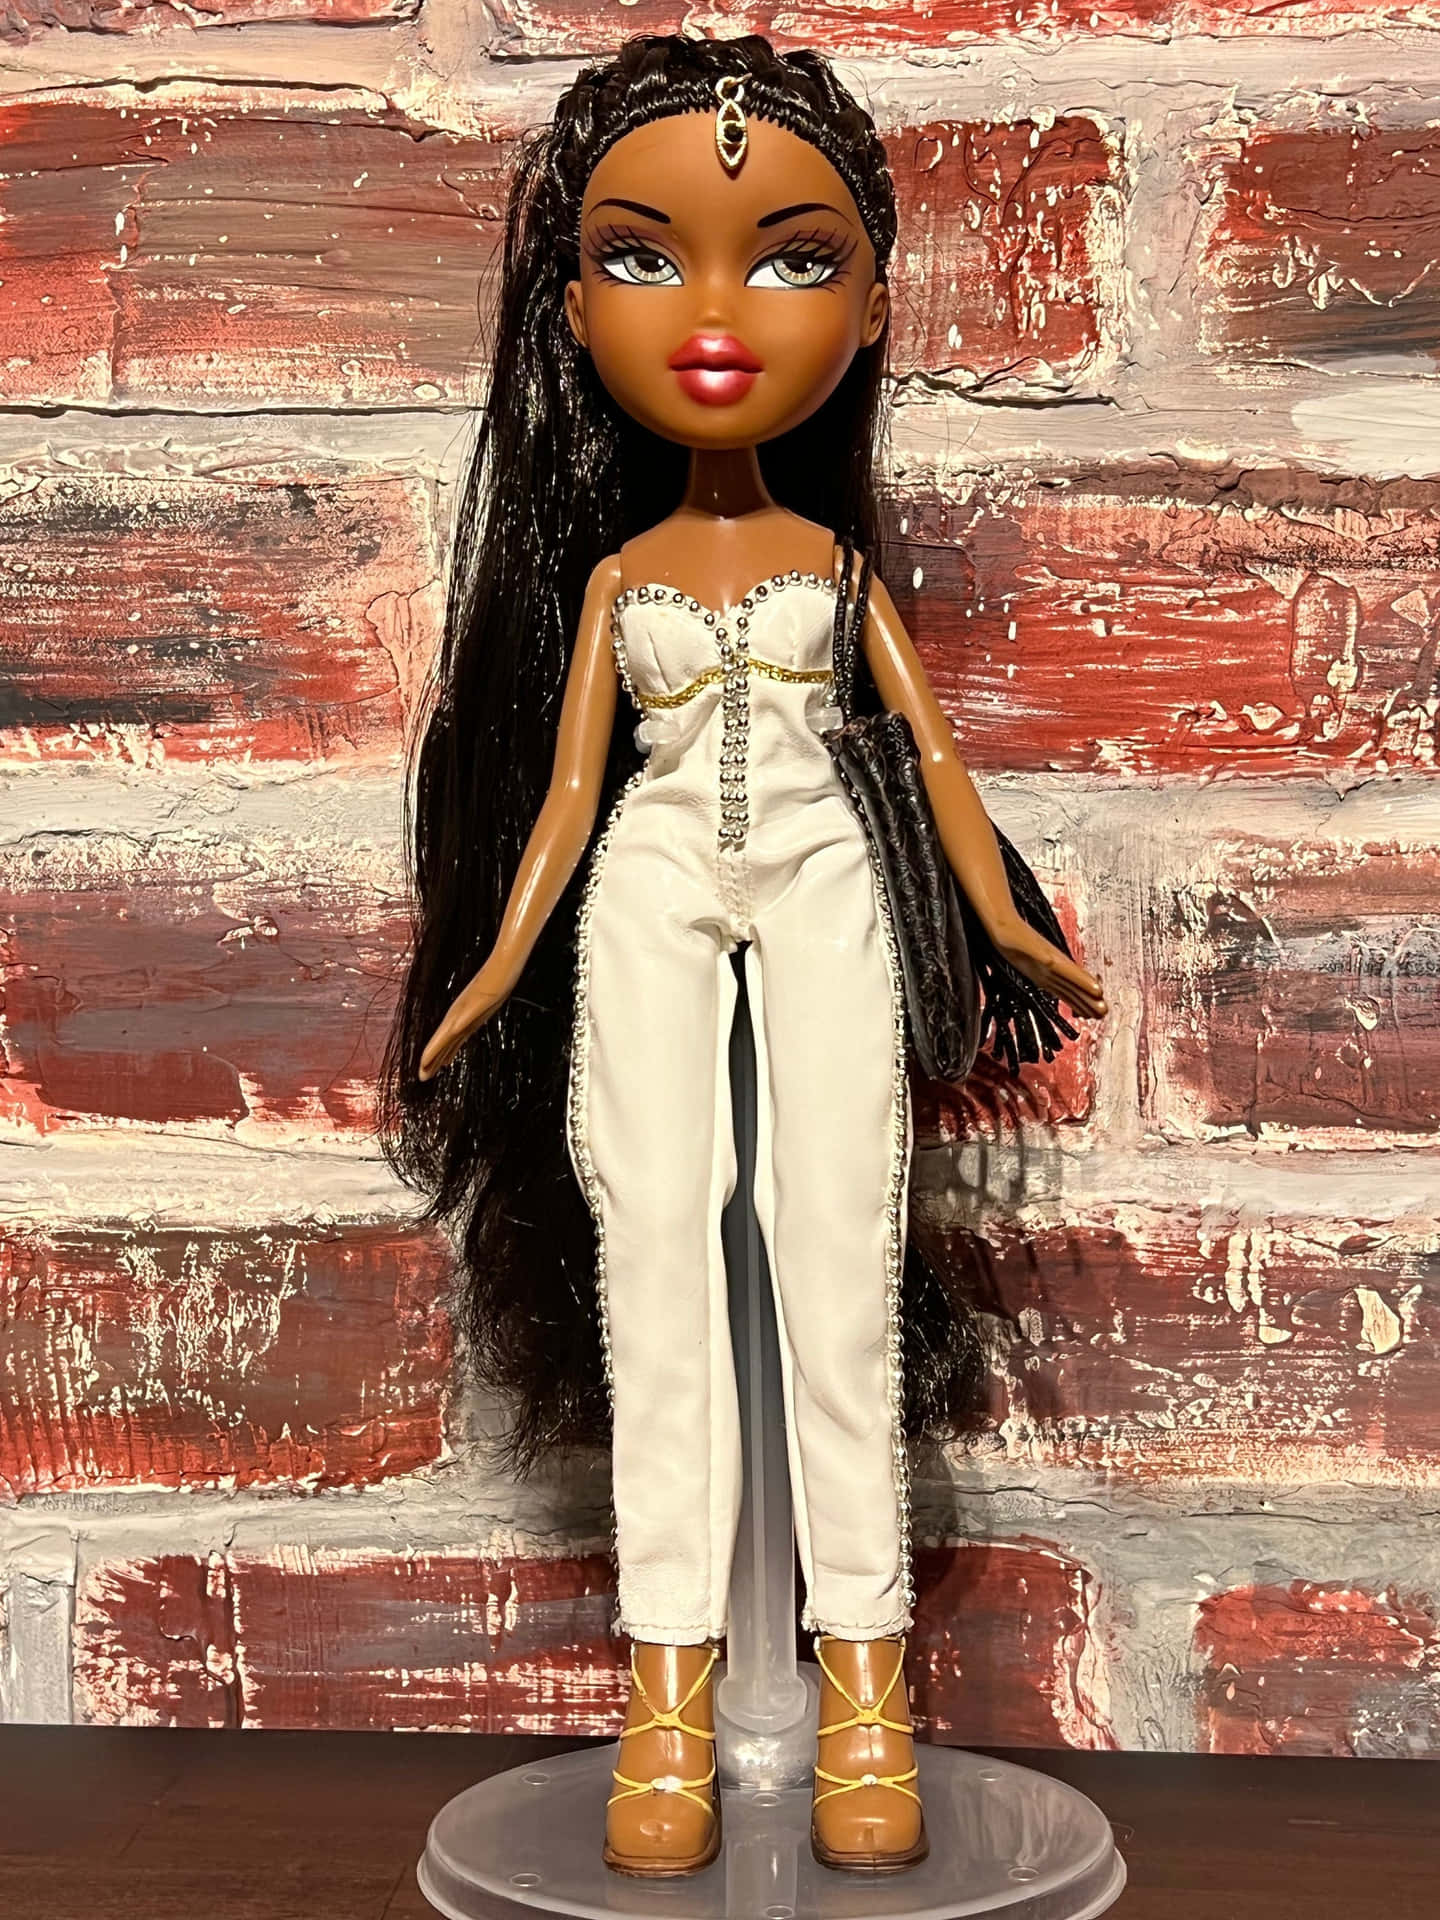 Make a statement and express your unique, individual style with Bratz Aesthetics!